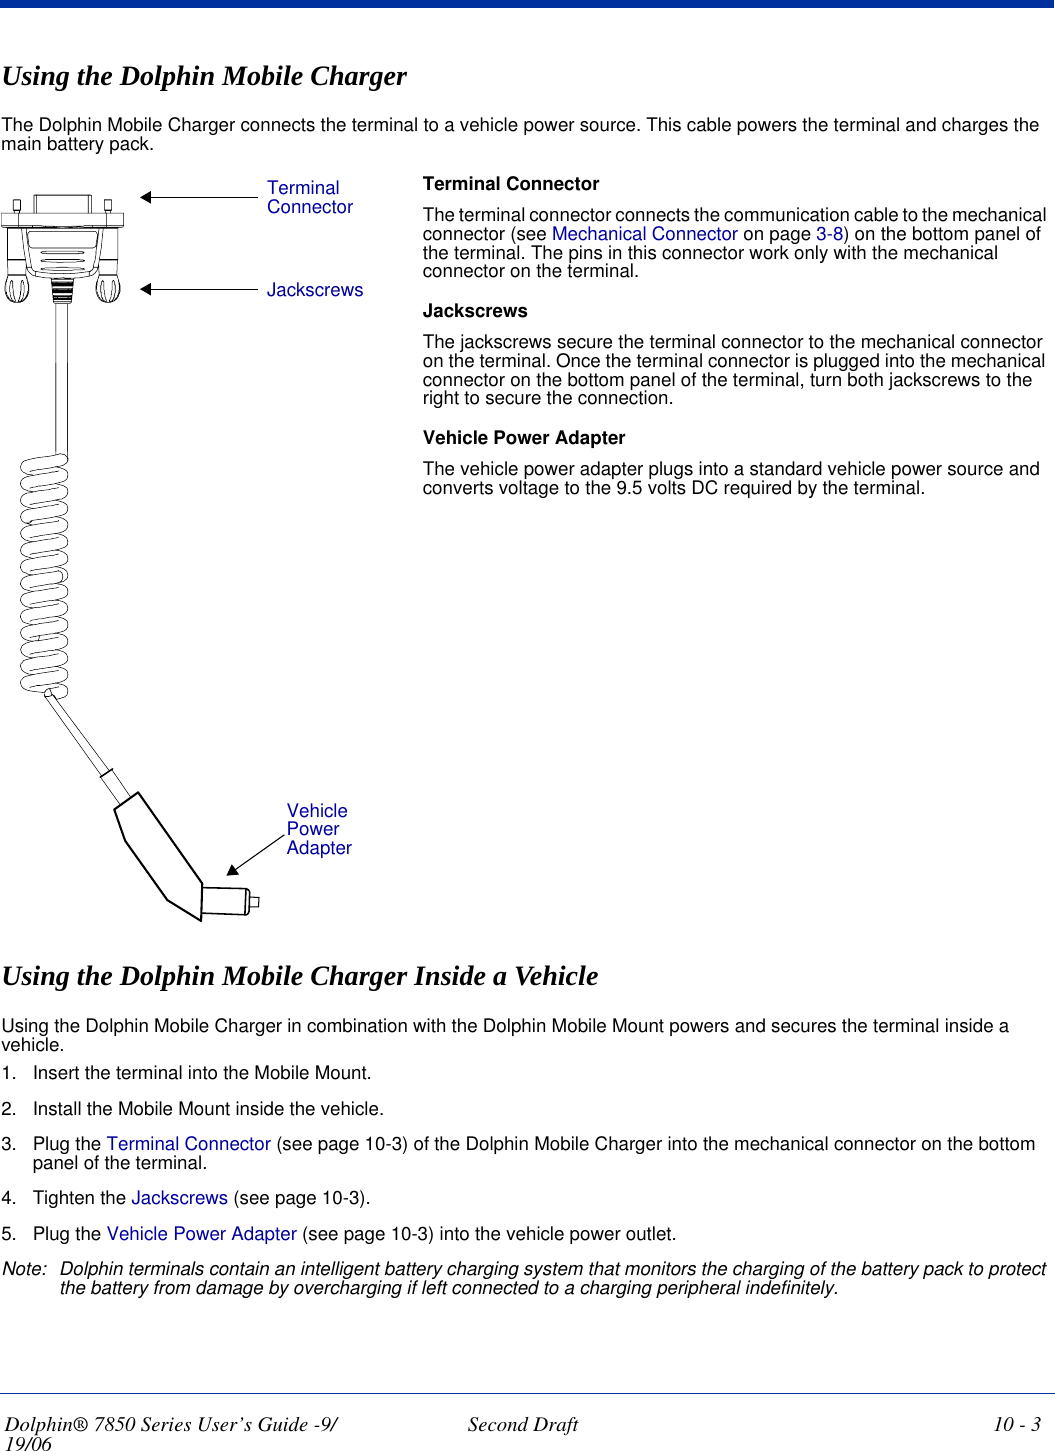 Dolphin® 7850 Series User’s Guide -9/19/06 Second Draft 10 - 3Using the Dolphin Mobile ChargerThe Dolphin Mobile Charger connects the terminal to a vehicle power source. This cable powers the terminal and charges the main battery pack.Terminal ConnectorThe terminal connector connects the communication cable to the mechanical connector (see Mechanical Connector on page 3-8) on the bottom panel of the terminal. The pins in this connector work only with the mechanical connector on the terminal.JackscrewsThe jackscrews secure the terminal connector to the mechanical connector on the terminal. Once the terminal connector is plugged into the mechanical connector on the bottom panel of the terminal, turn both jackscrews to the right to secure the connection. Vehicle Power AdapterThe vehicle power adapter plugs into a standard vehicle power source and converts voltage to the 9.5 volts DC required by the terminal.Using the Dolphin Mobile Charger Inside a VehicleUsing the Dolphin Mobile Charger in combination with the Dolphin Mobile Mount powers and secures the terminal inside a vehicle. 1. Insert the terminal into the Mobile Mount.2. Install the Mobile Mount inside the vehicle.3. Plug the Terminal Connector (see page 10-3) of the Dolphin Mobile Charger into the mechanical connector on the bottom panel of the terminal.4. Tighten the Jackscrews (see page 10-3).5. Plug the Vehicle Power Adapter (see page 10-3) into the vehicle power outlet.Note: Dolphin terminals contain an intelligent battery charging system that monitors the charging of the battery pack to protect the battery from damage by overcharging if left connected to a charging peripheral indefinitely. Terminal ConnectorJackscrewsVehicle Power Adapter